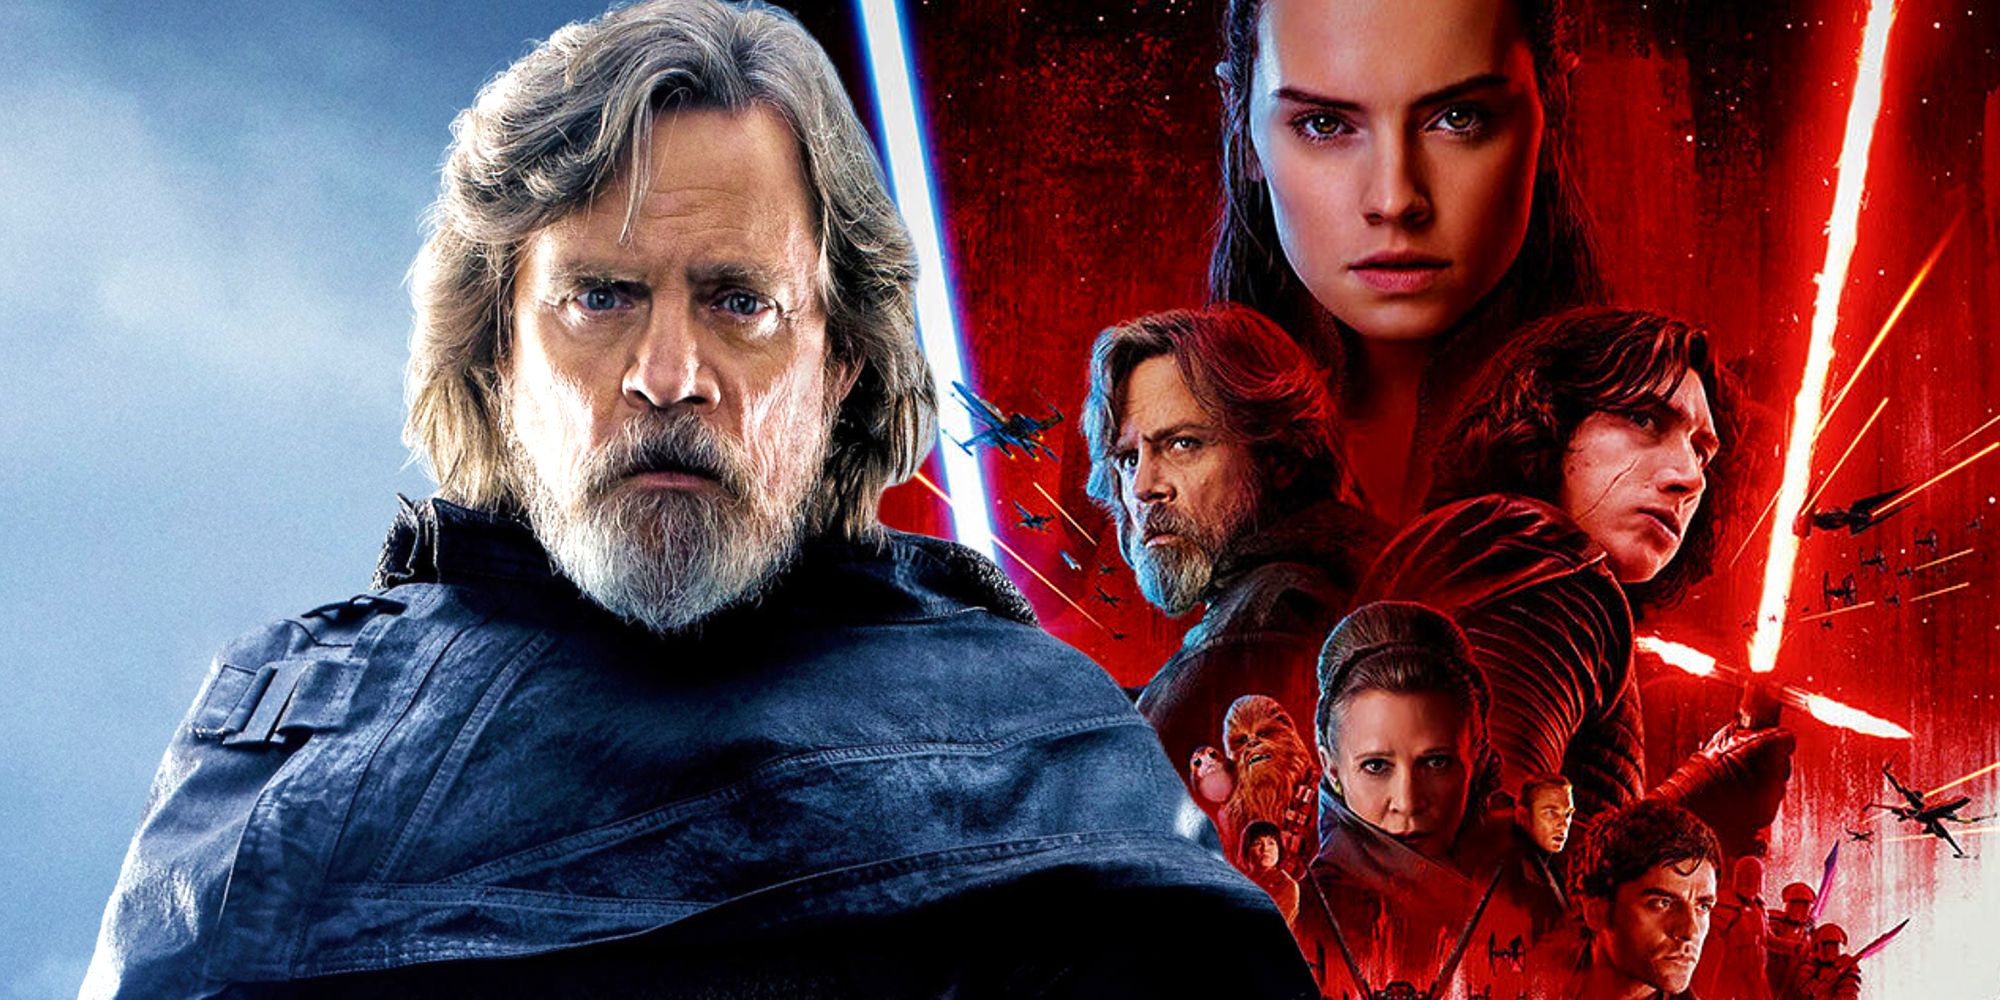 Star Wars Fact Check: Does Mark Hamill Really Hate The Last Jedi?